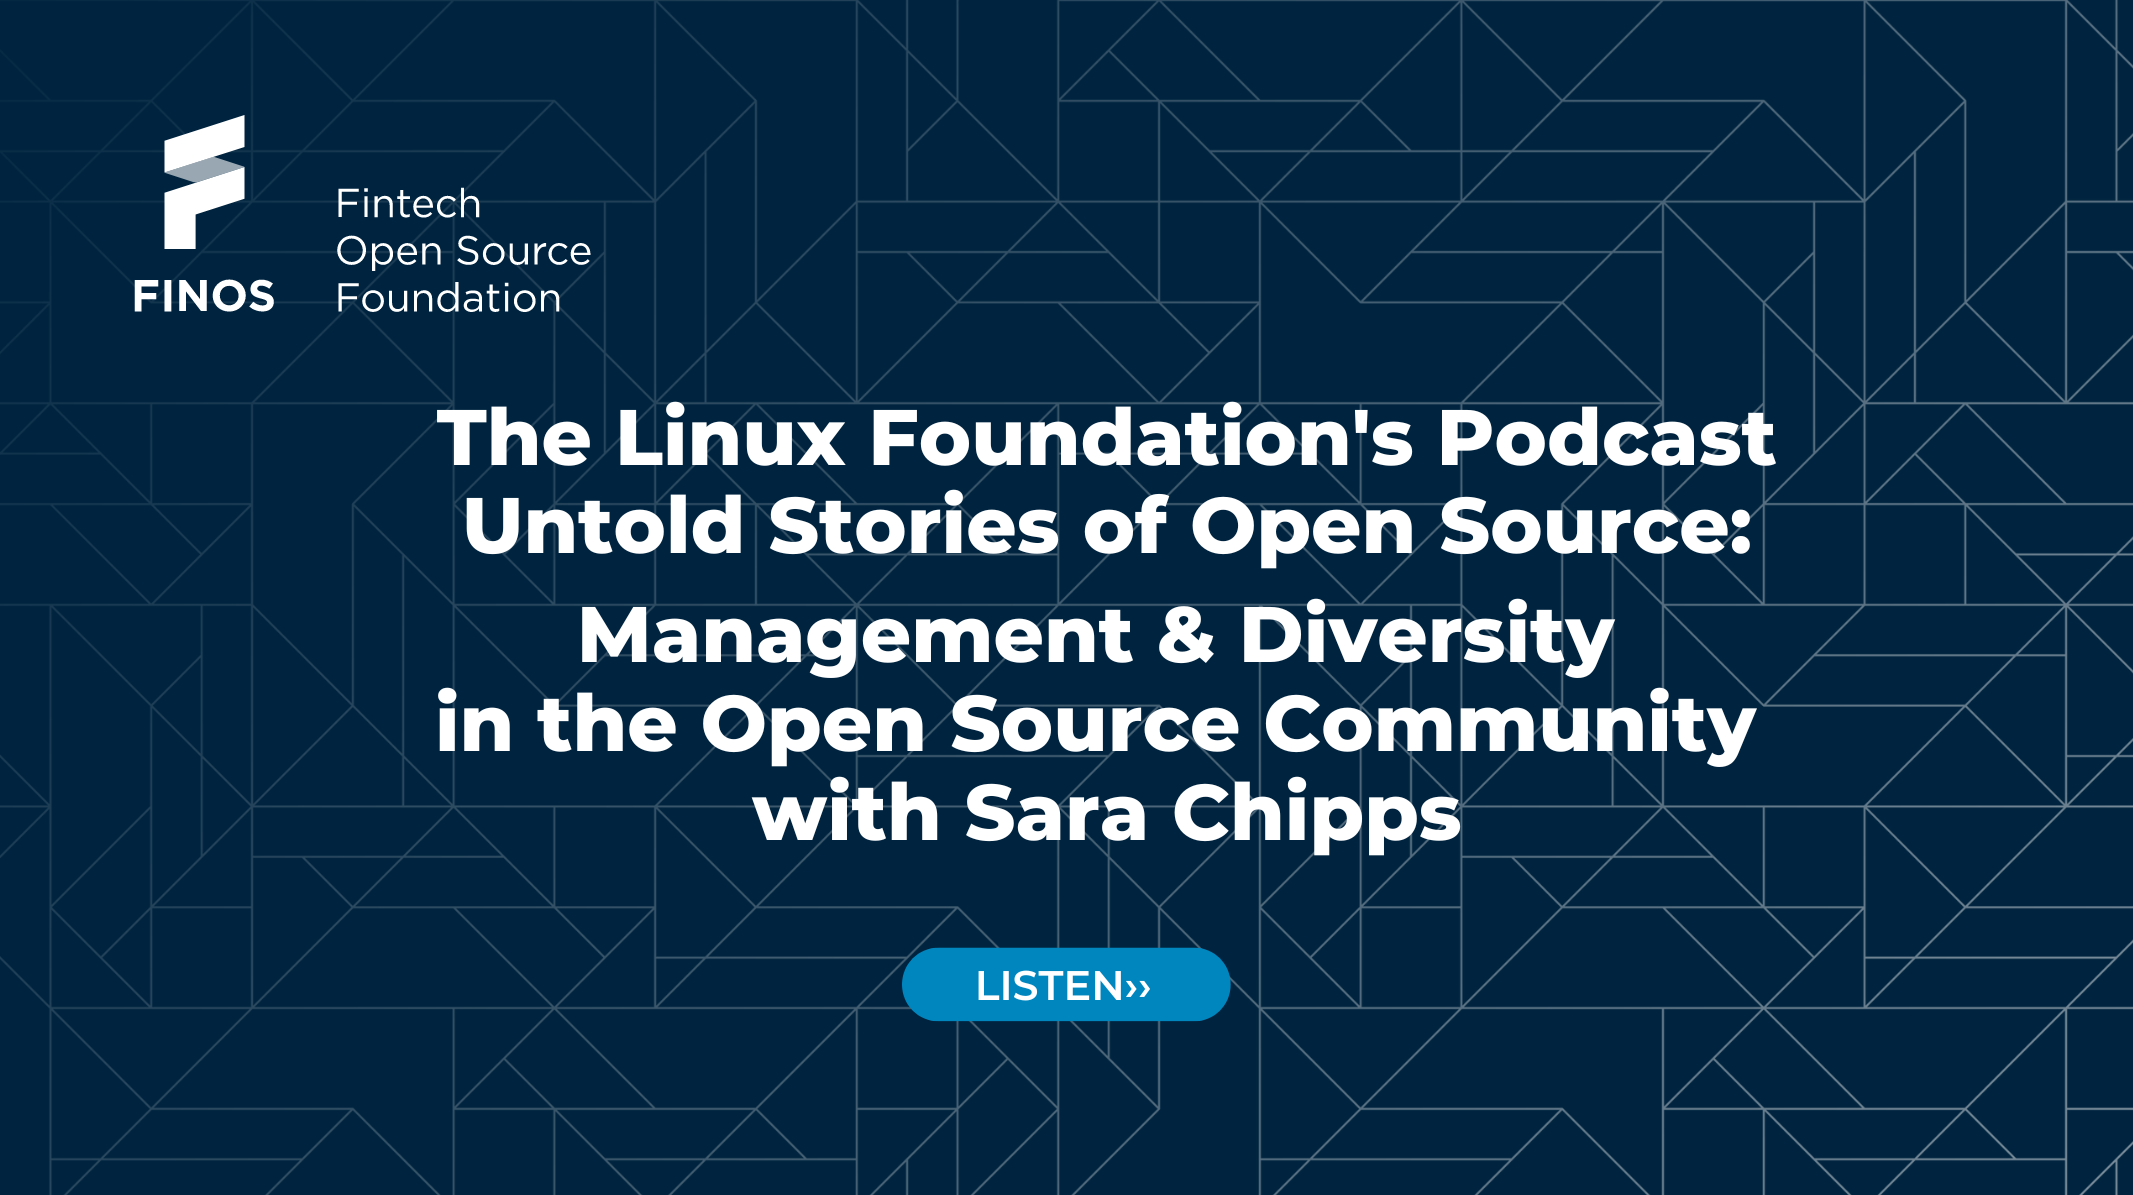 Podcast: The Linux Foundation – Management & Diversity in the Open Source Community